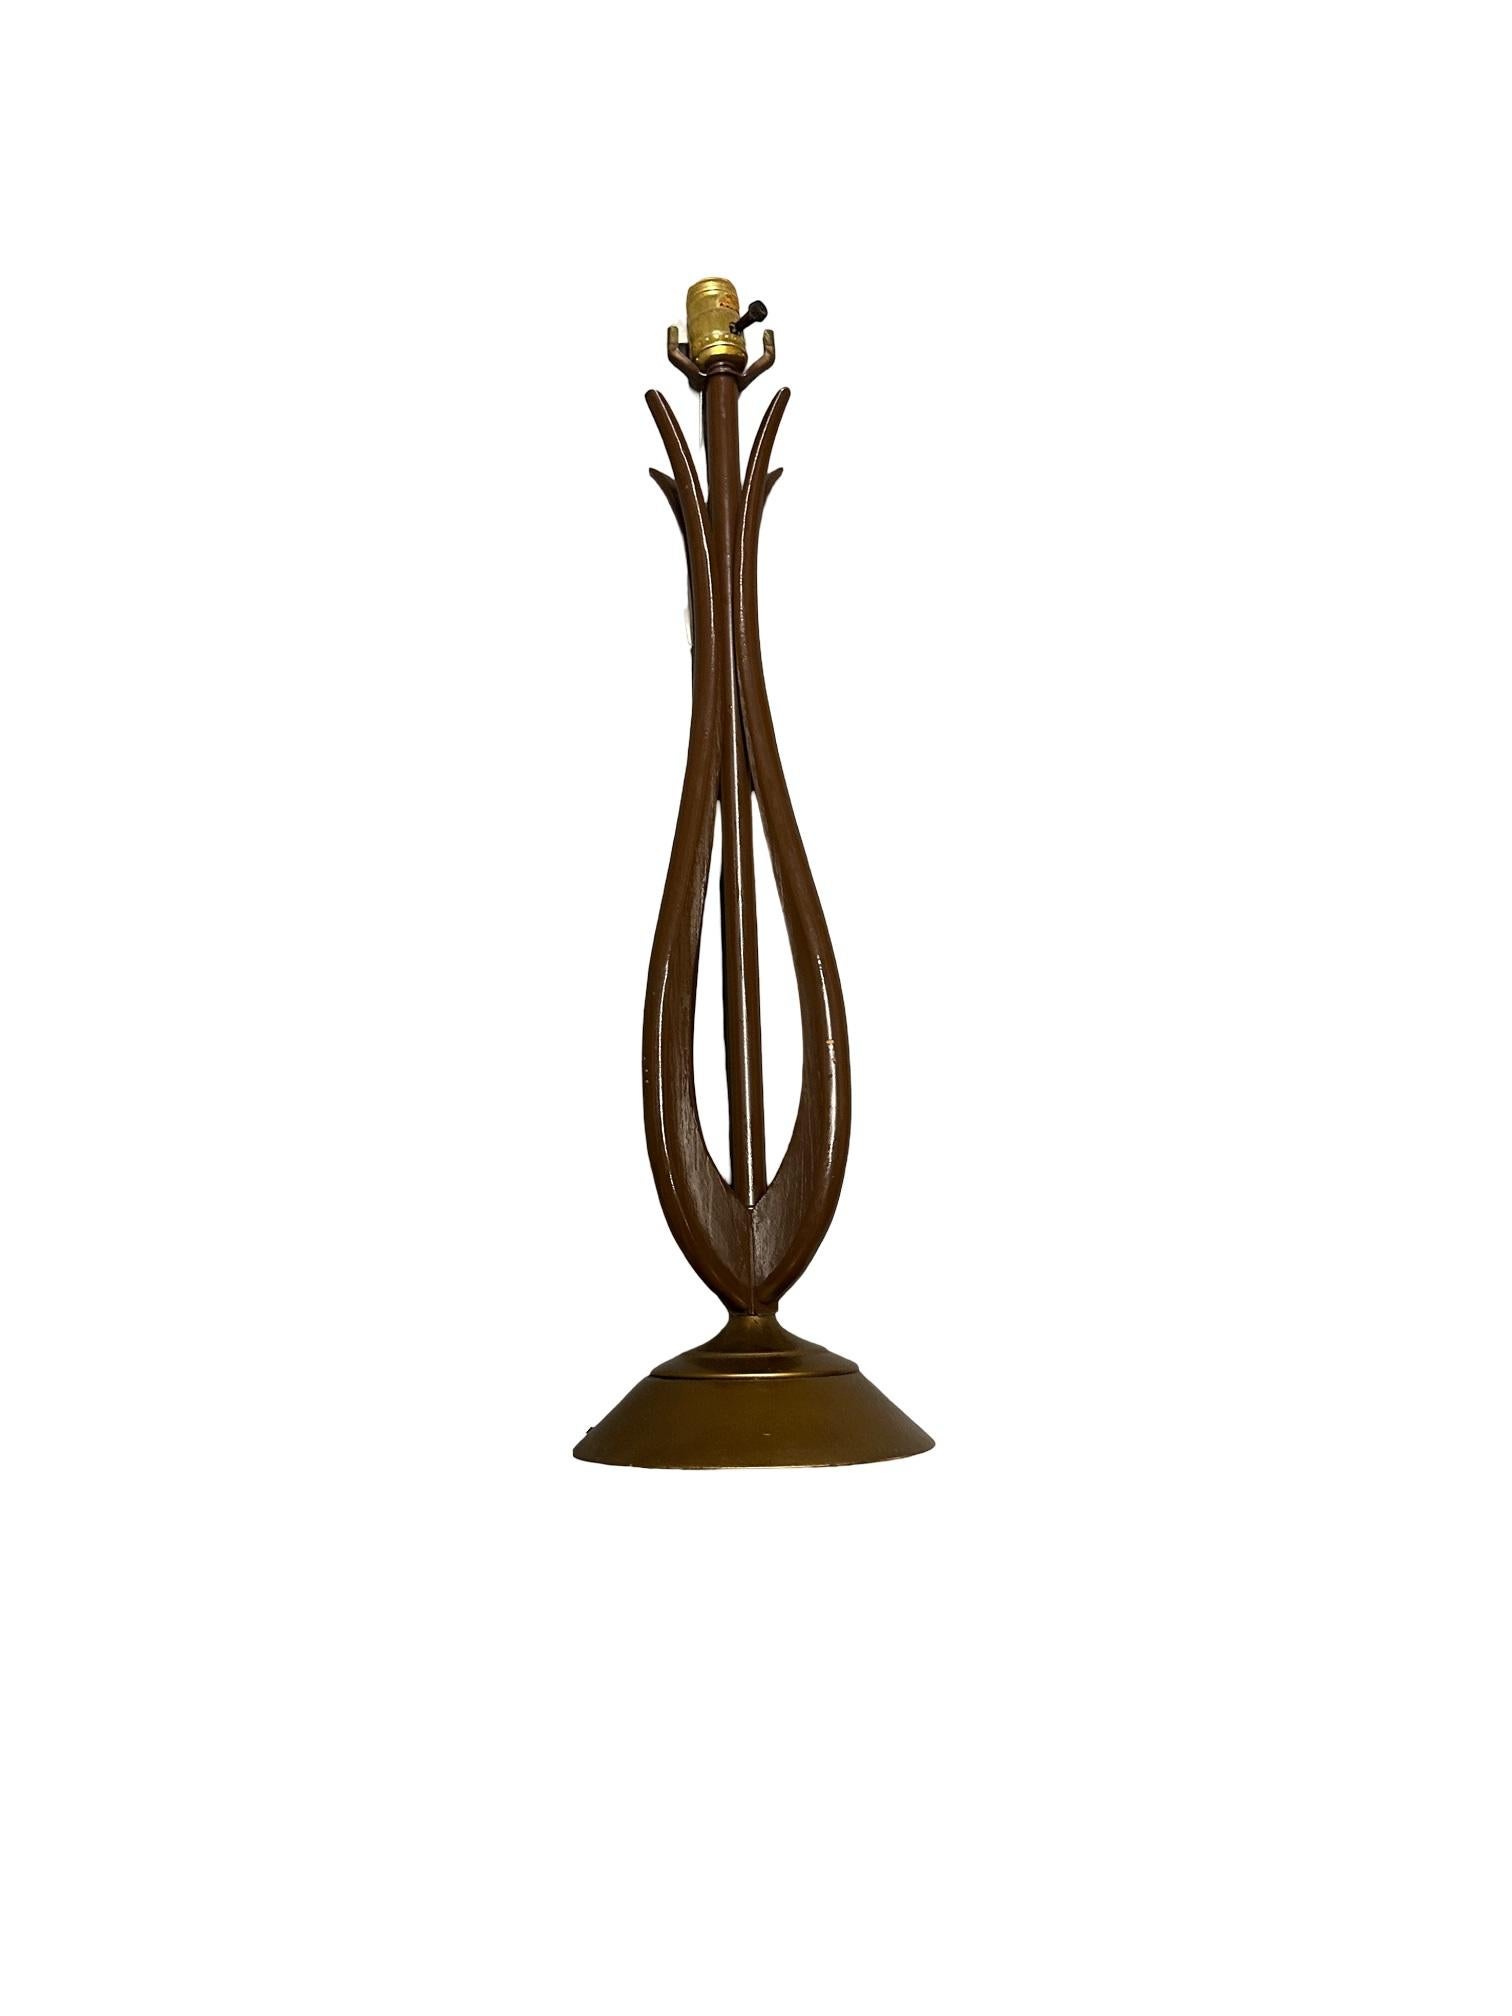 Modernist Harp Shaped Sculptural Walnut and Brass Tone Table Lamp, Pair For Sale 1